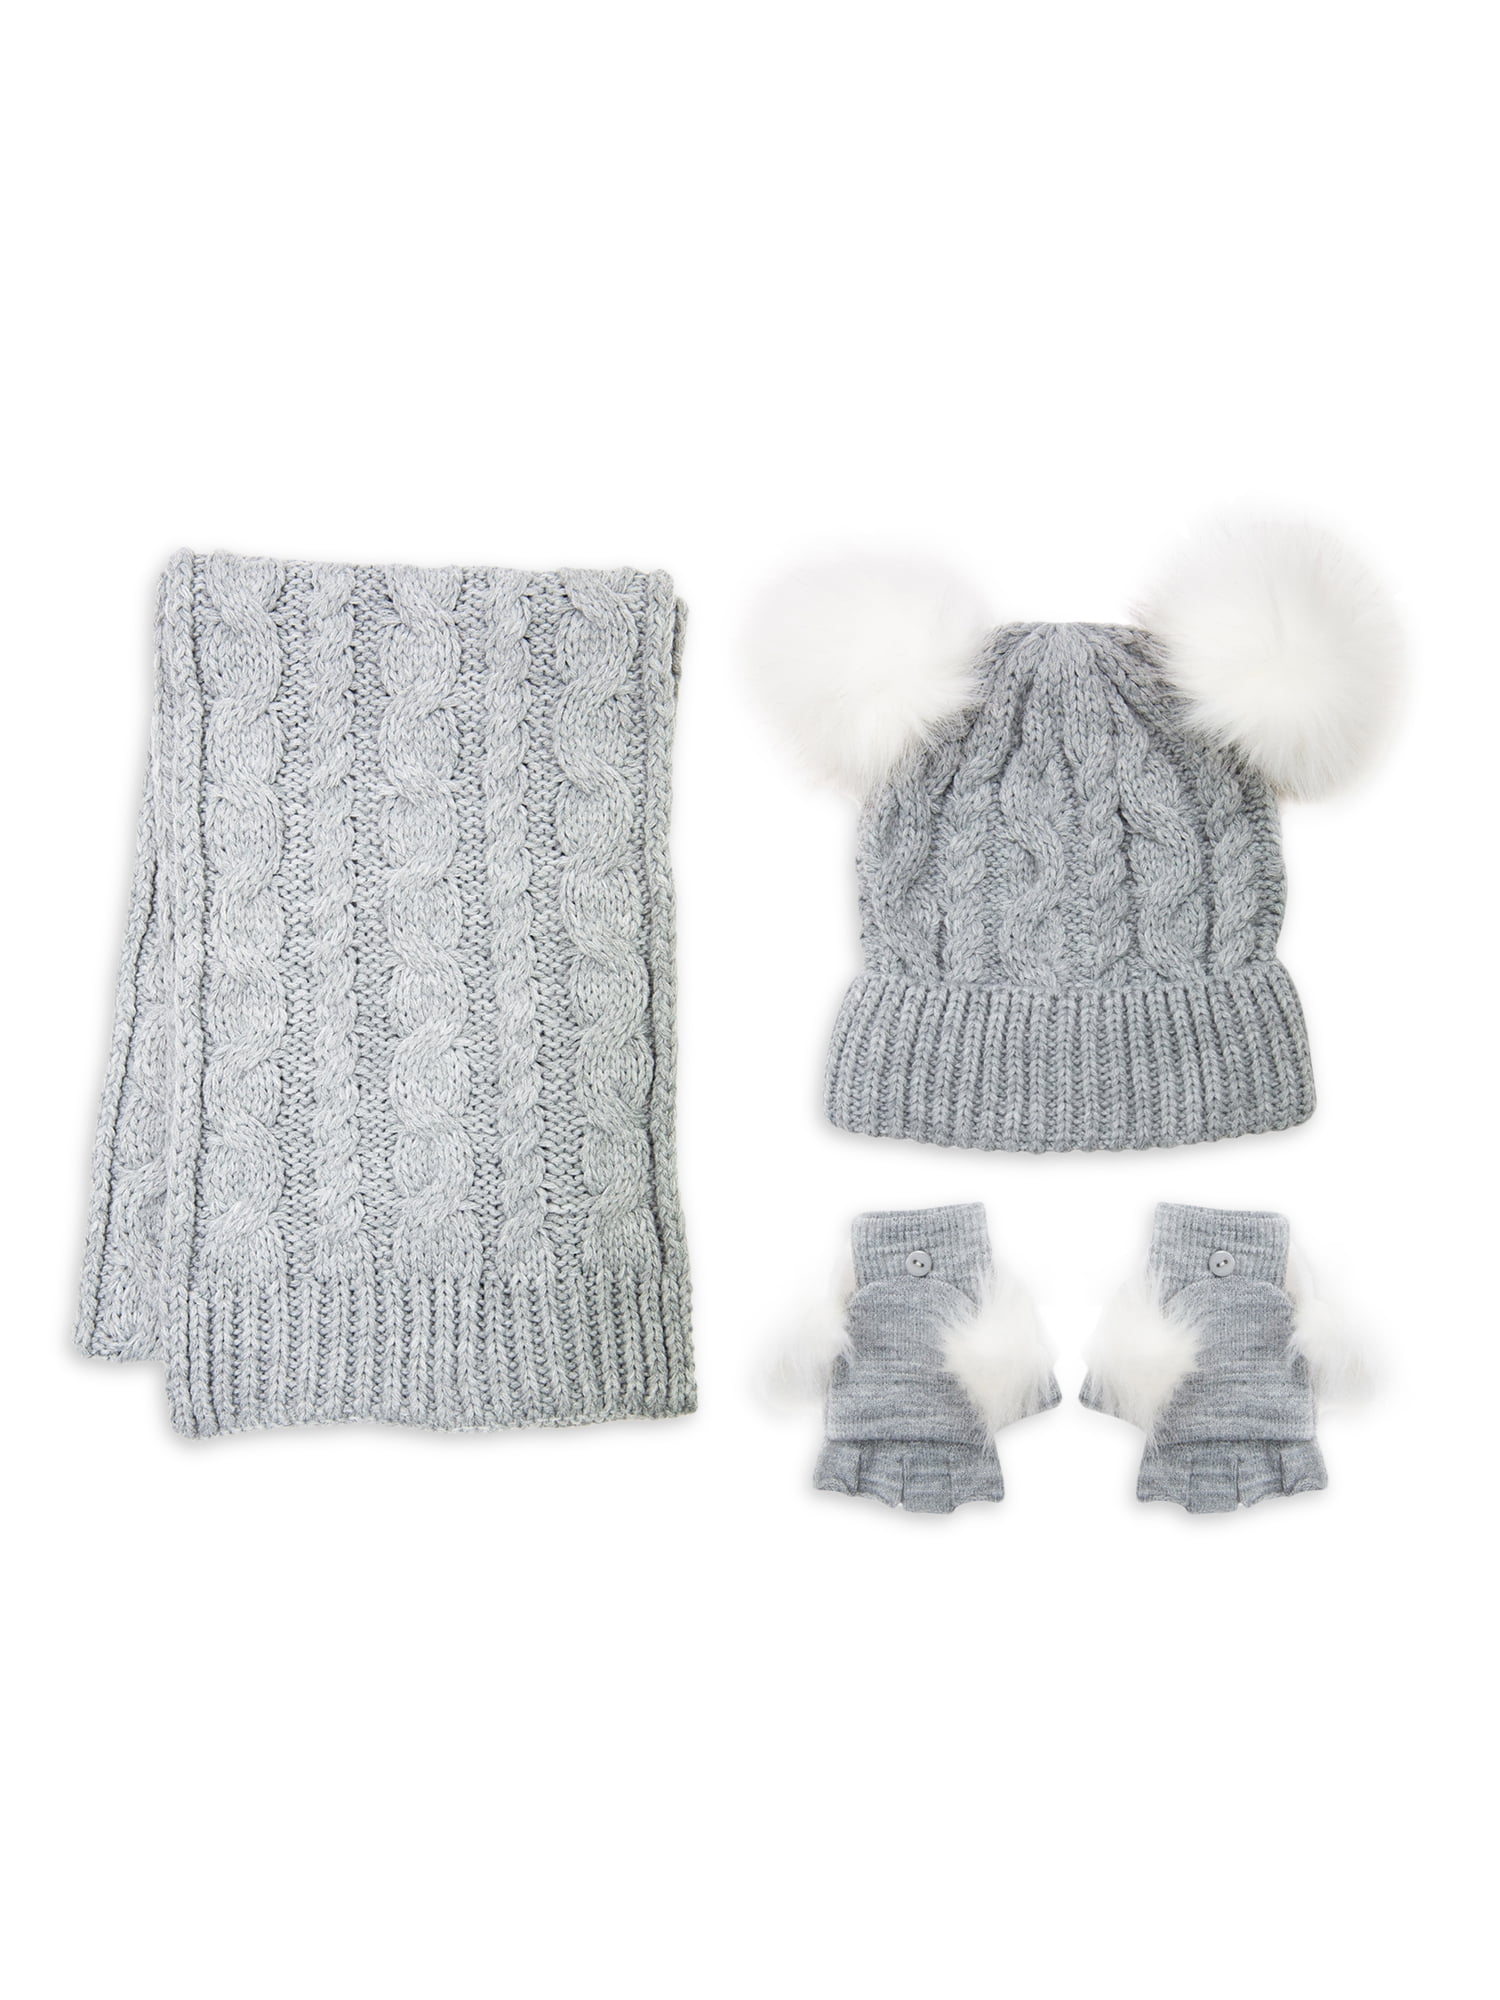 Girls Cable Knit Beanie Hat with Poms and Flip Top Glove and Scarf, 3-Piece Set, One Size - Walmart.com